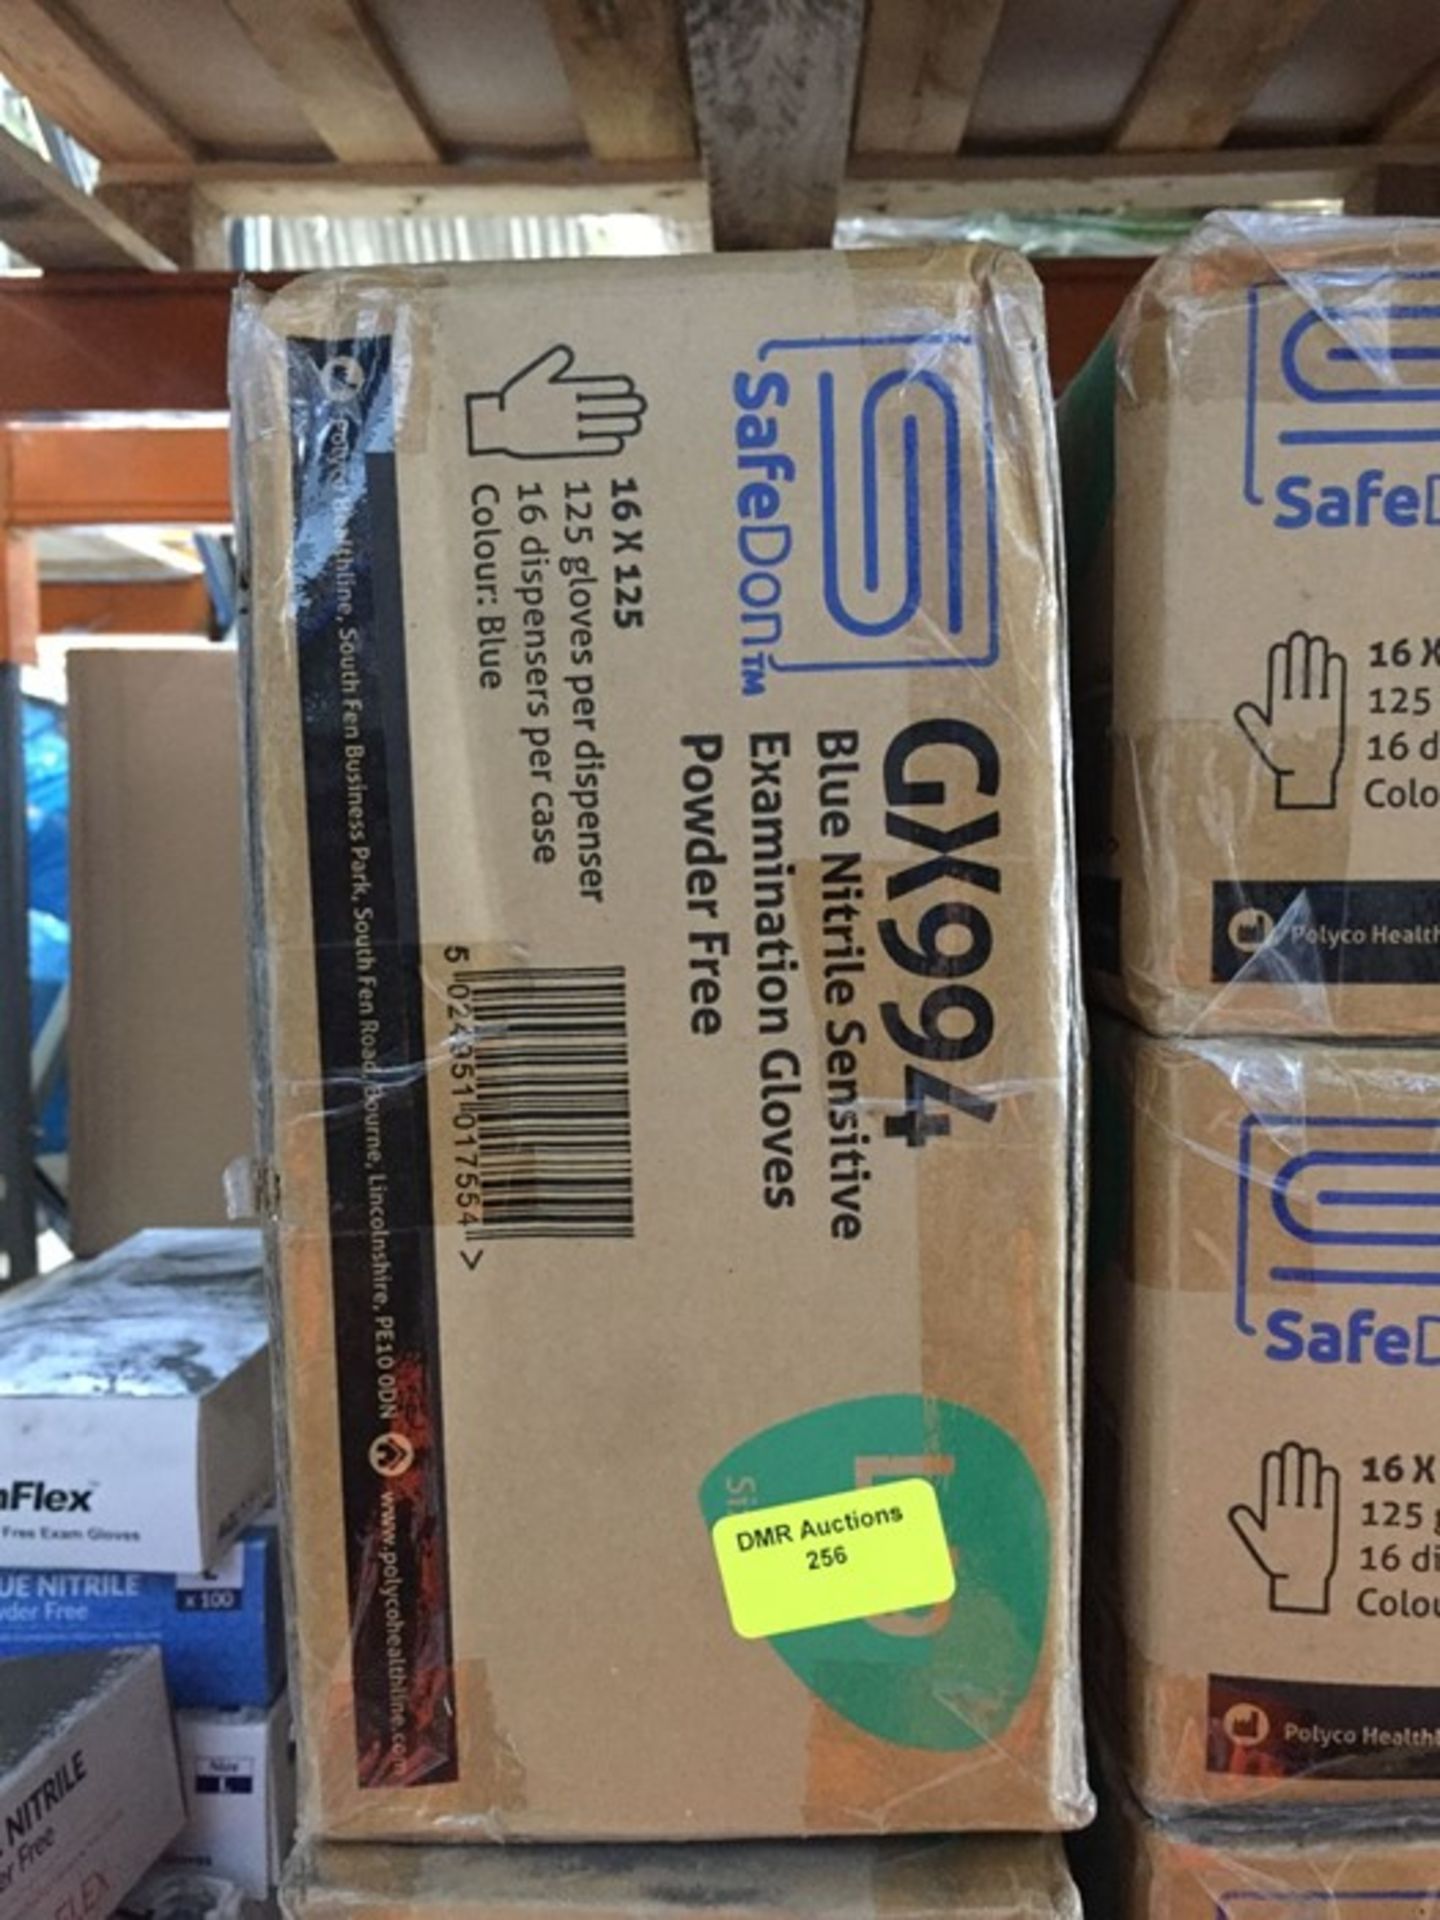 ONE LOT TO CONTAIN A BOX OF SAFEDON GX994 POWDER FREE GLOVES (QTY750 PAIRS PER BOX)